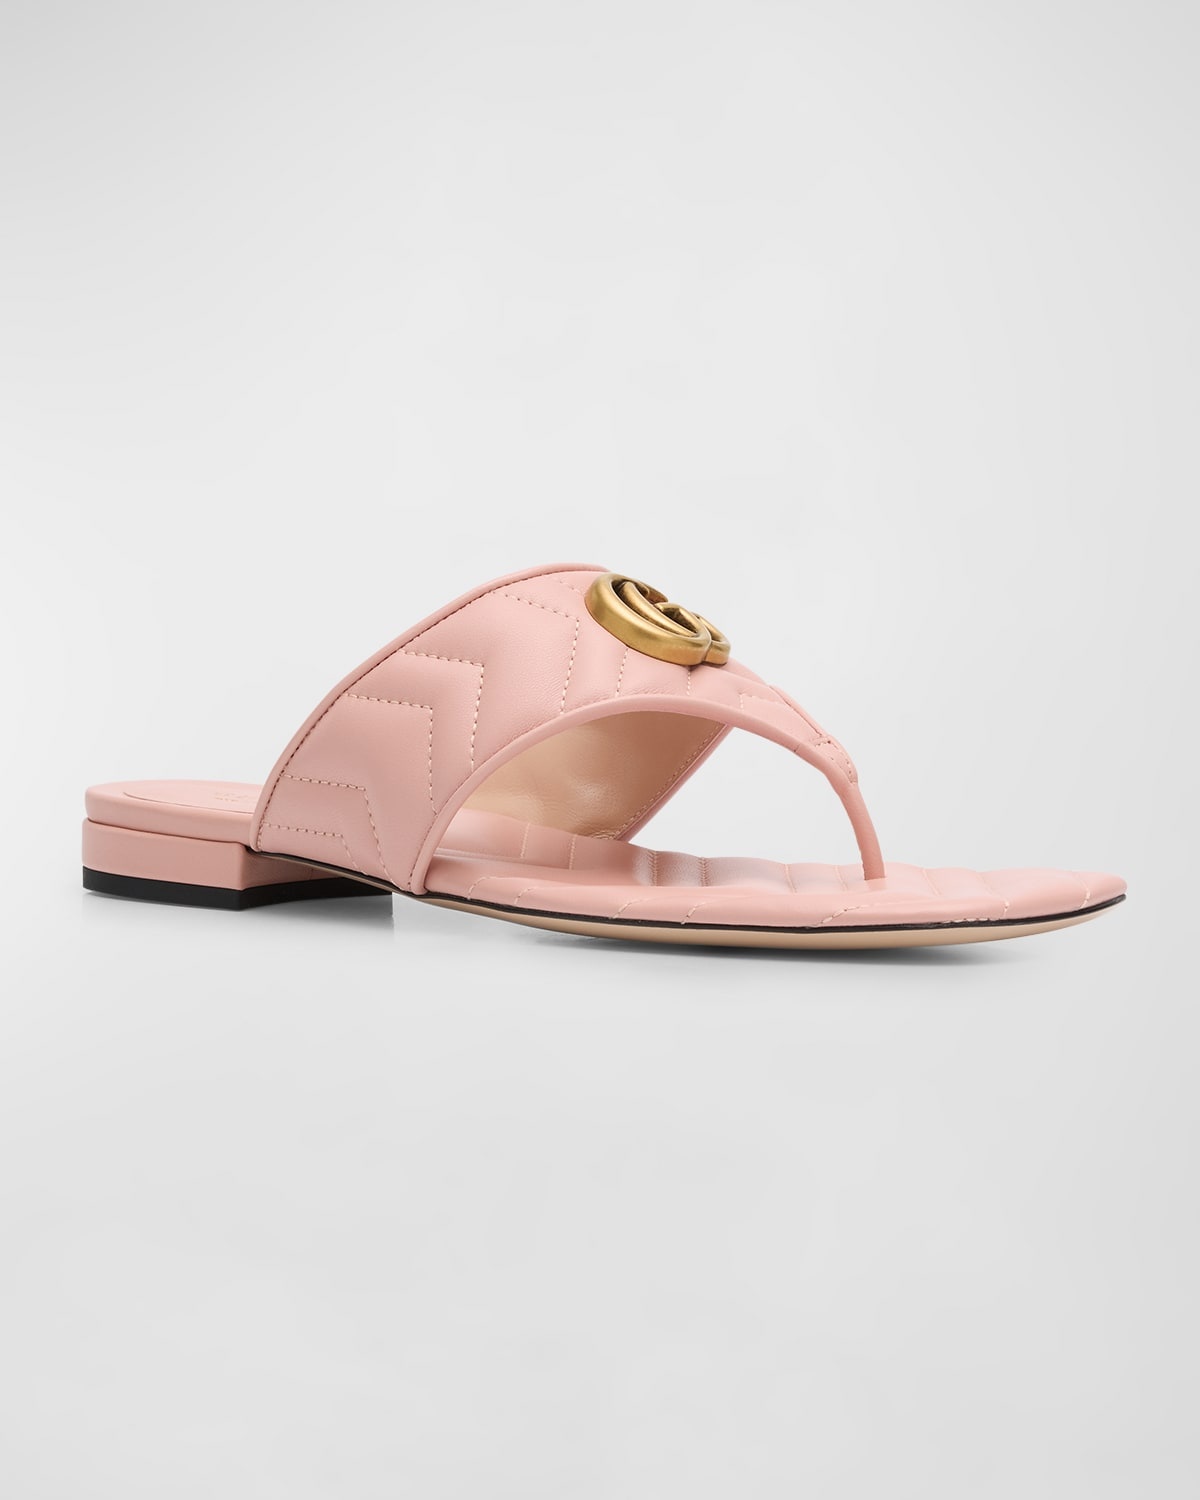 Double G Marmont Thong Sandals - 4